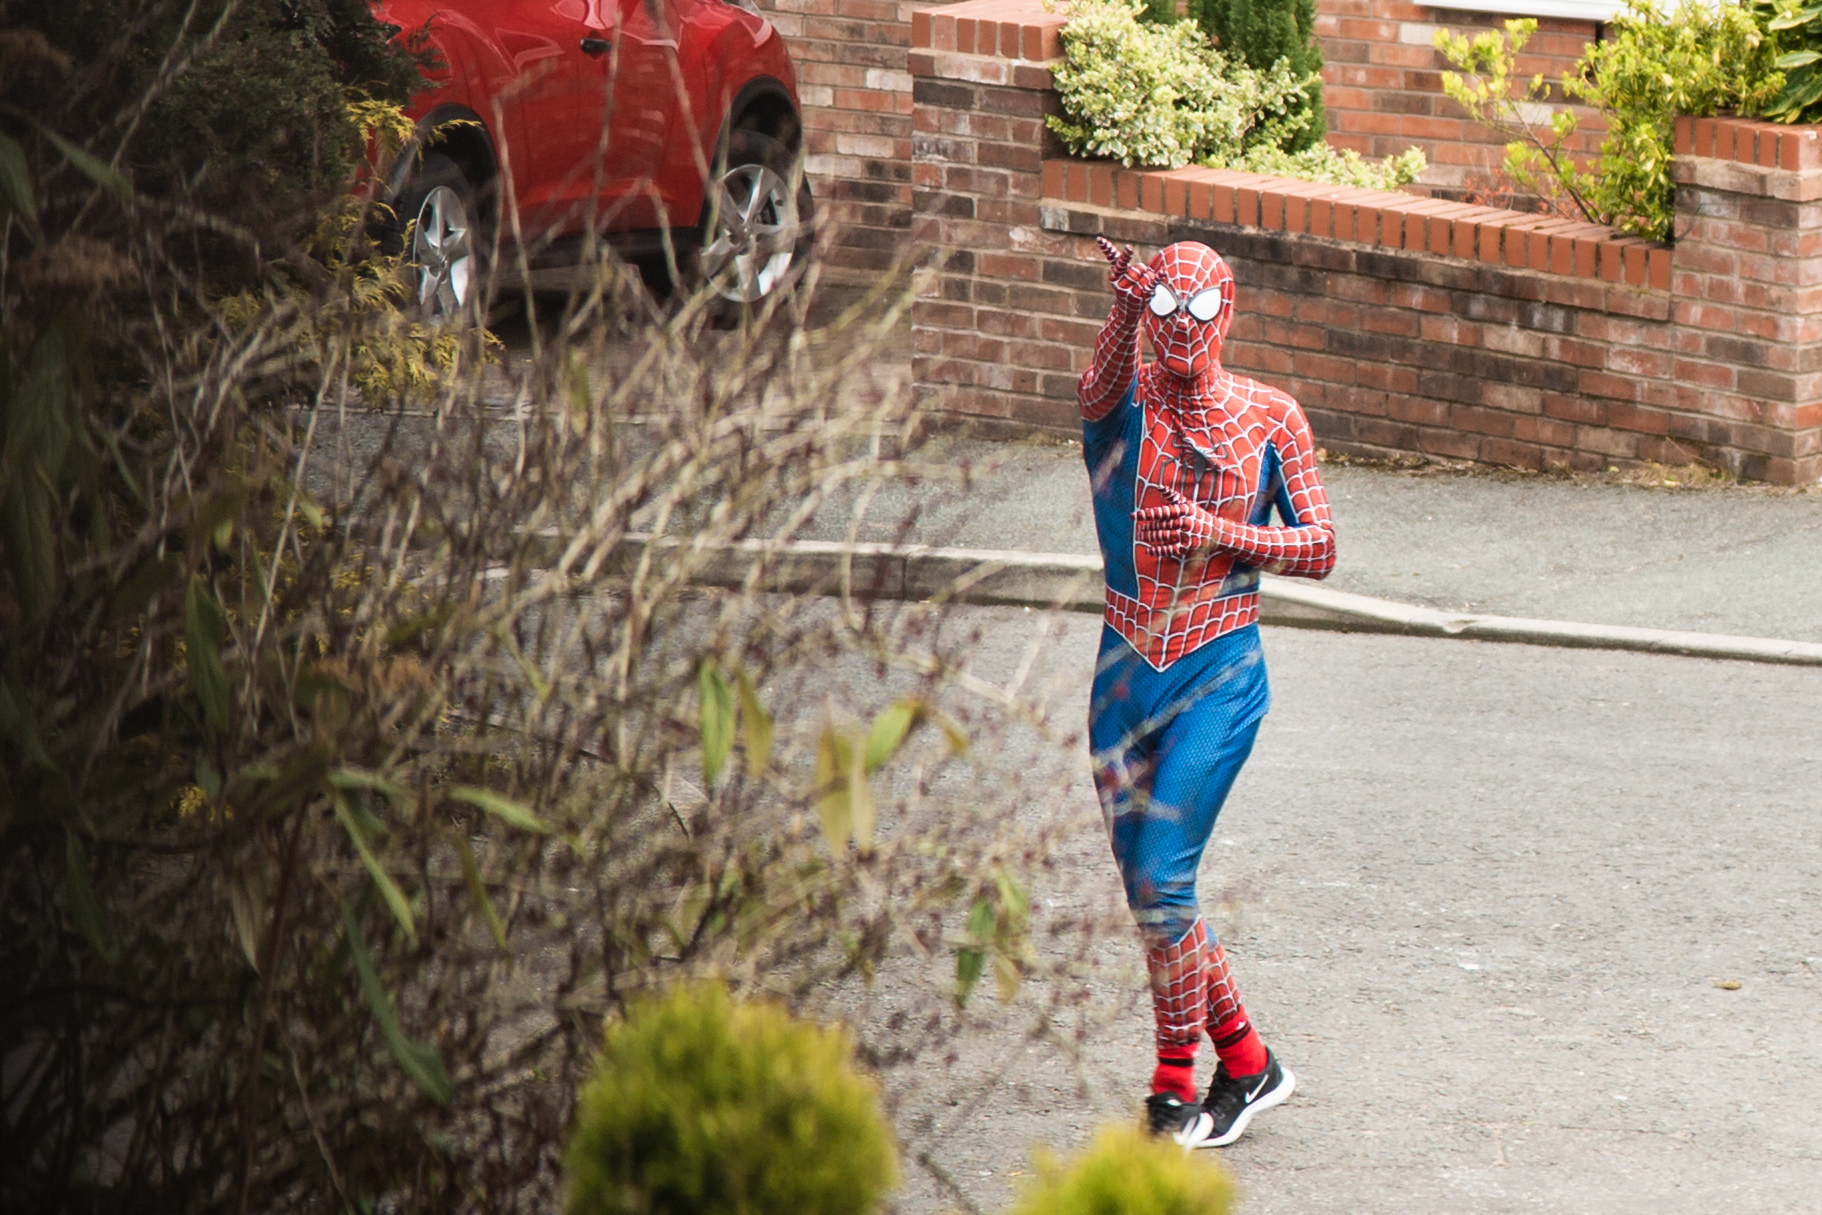 The 'Stockport Spider-Man' visits local residents